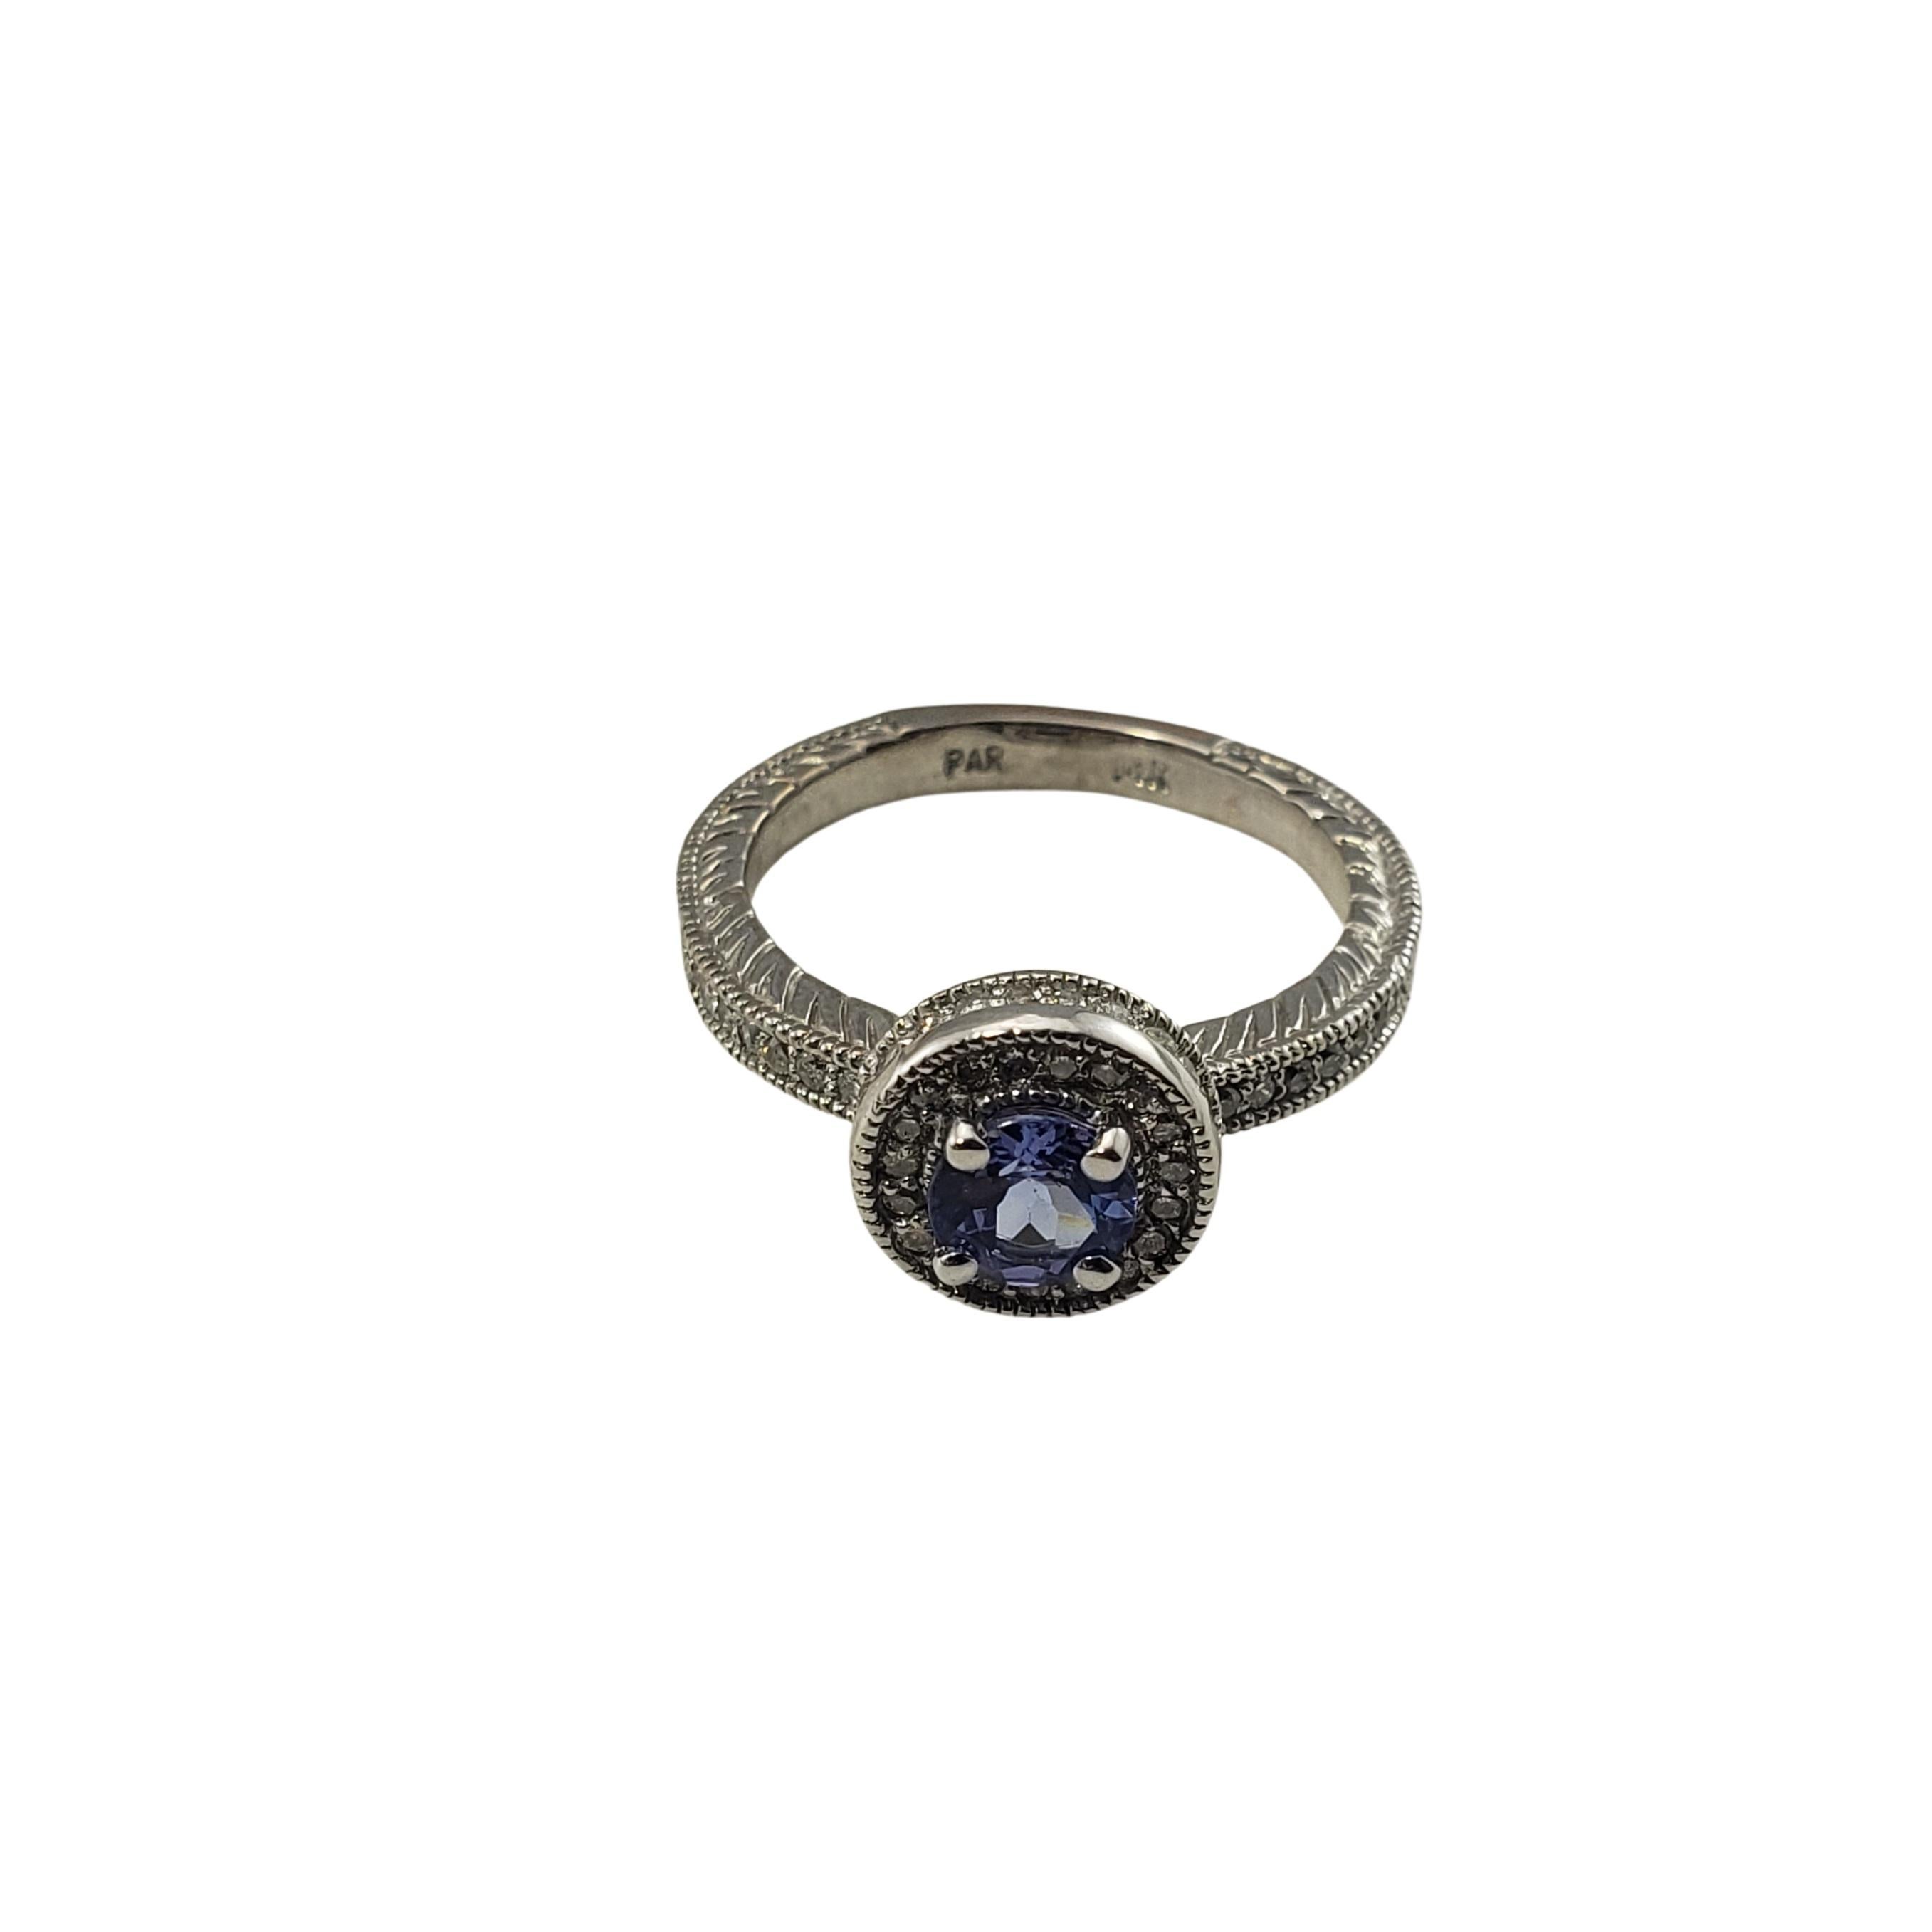 Vintage 14 Karat White Gold Tanzanite and Diamond Ring Size 7-

This elegant ring features one round tanzanite (5 mm) and 32 round brilliant cut diamonds set in classic 14K white gold.  
Width:  10 mm.  Shank: 3 mm.

Approximate total diamond